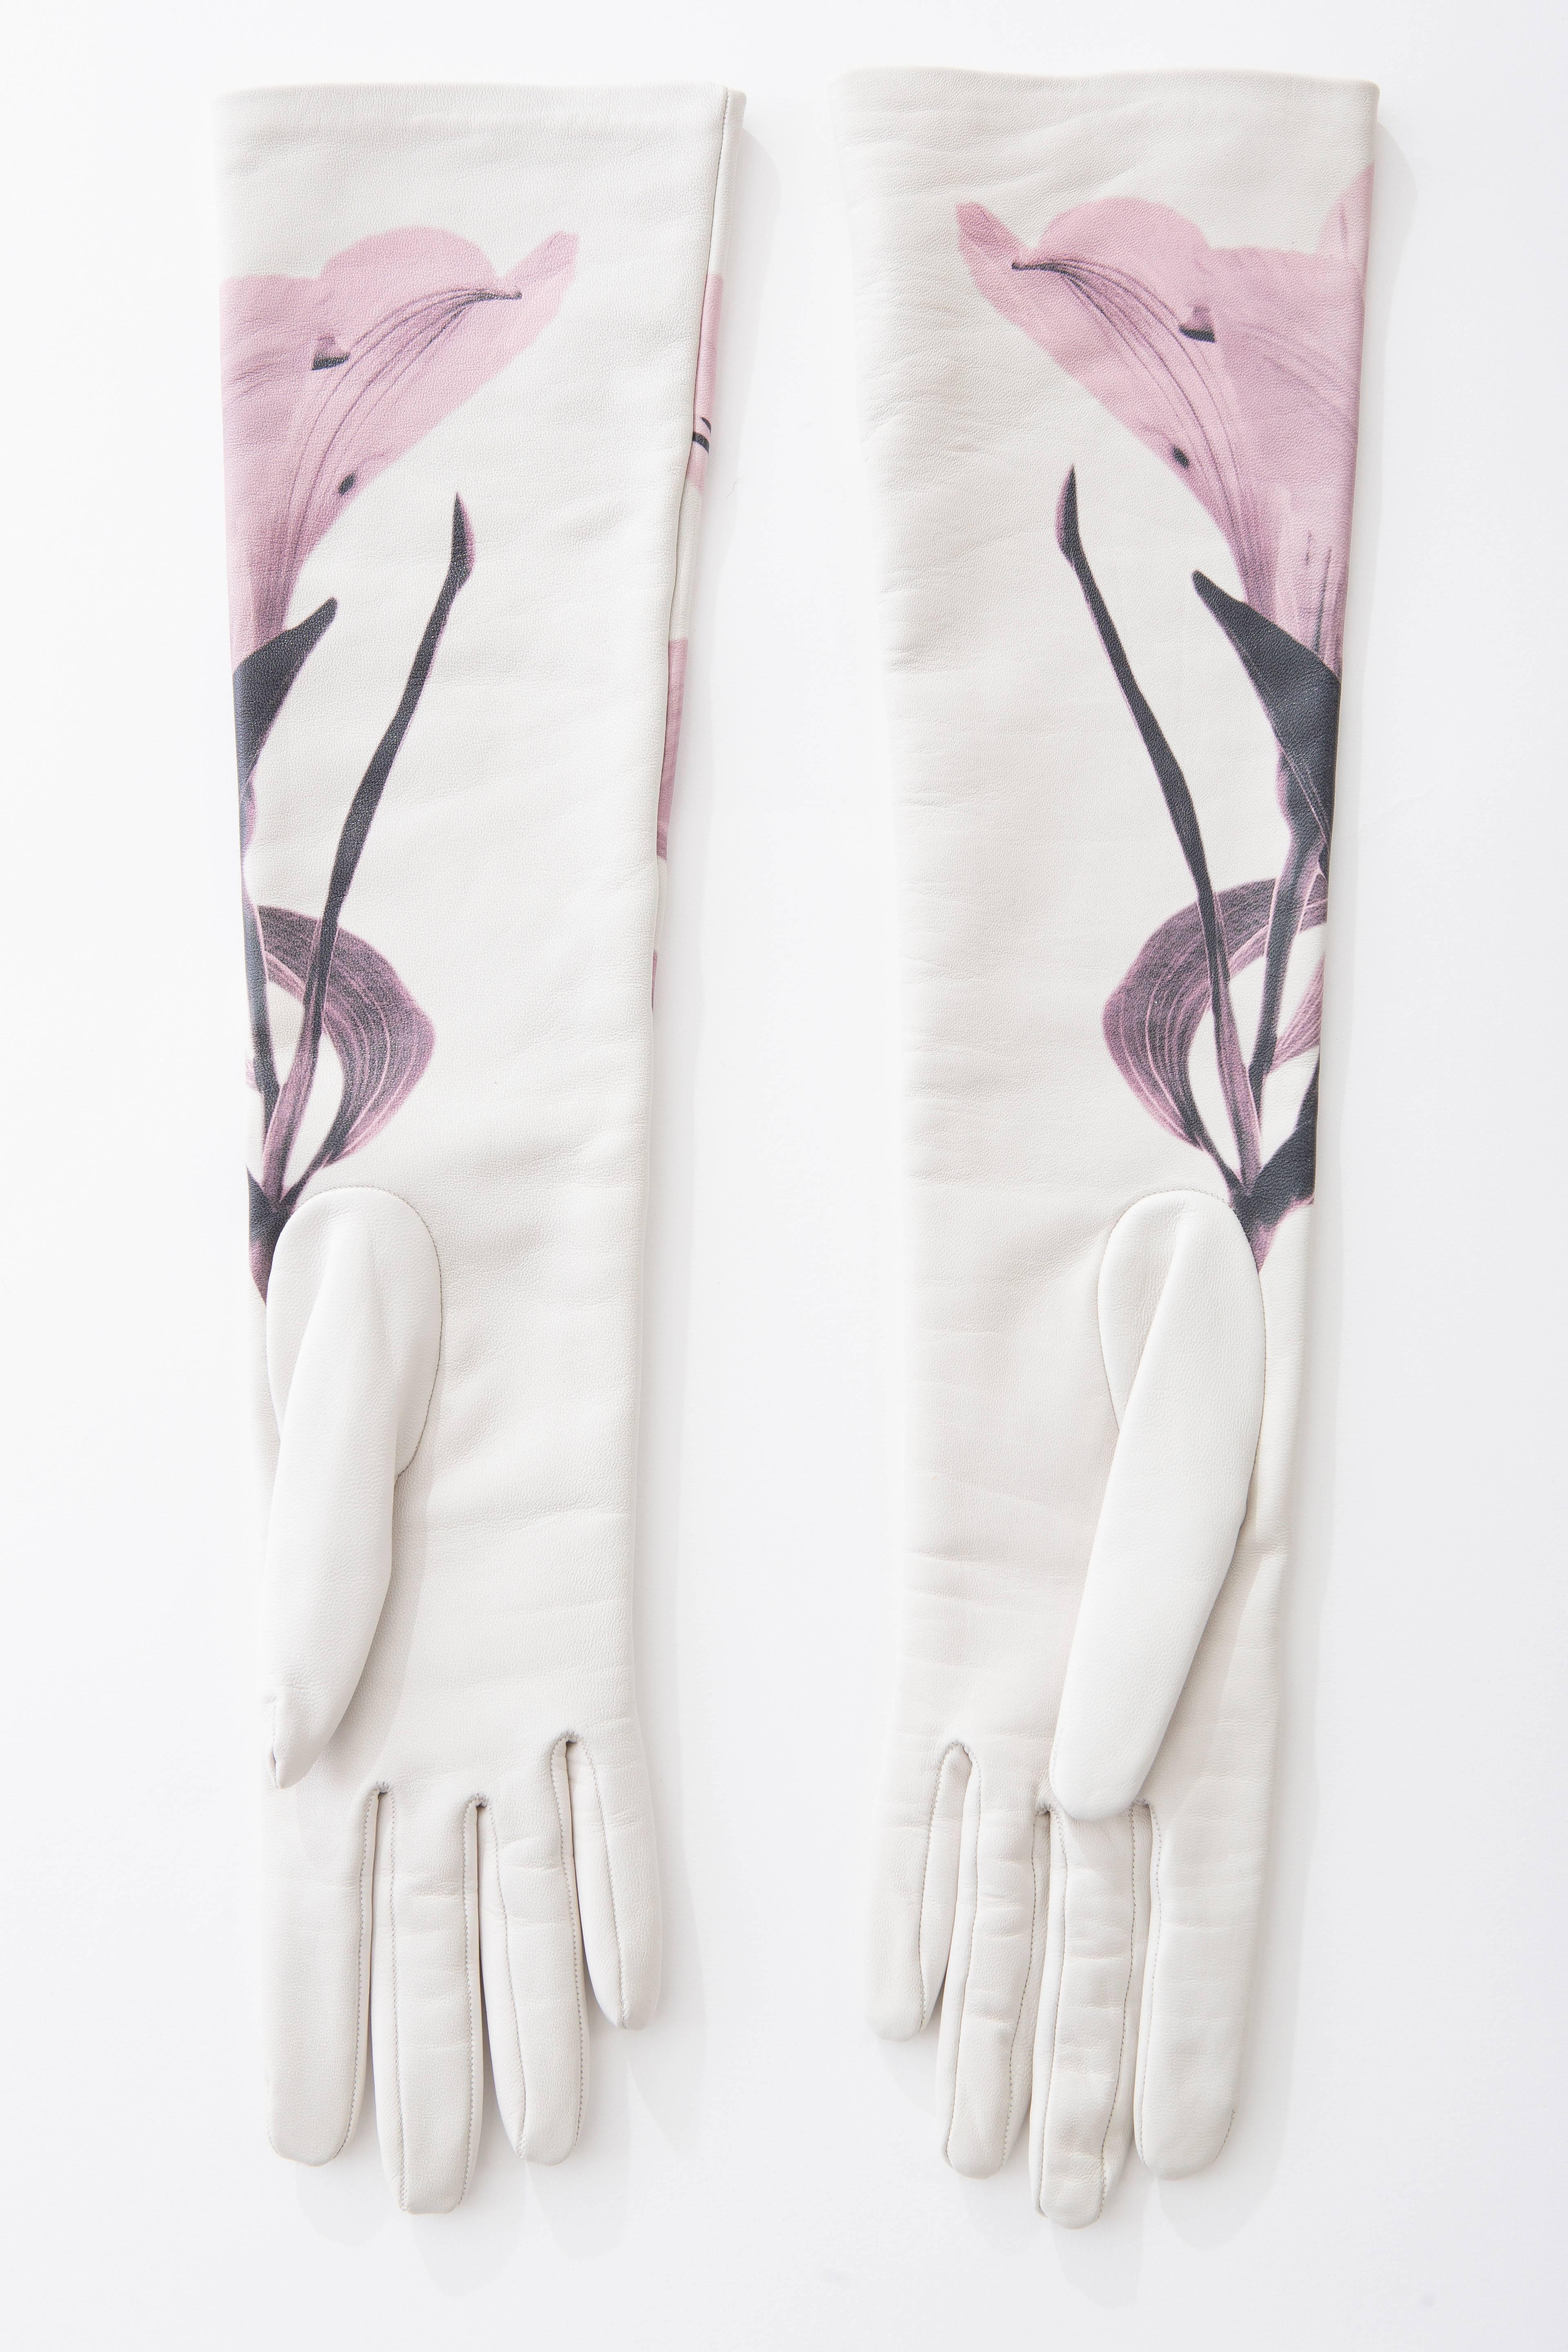 Gray  Raf Simons Christian Dior Ivory Printed Leather Gloves, Pre - Fall 2014